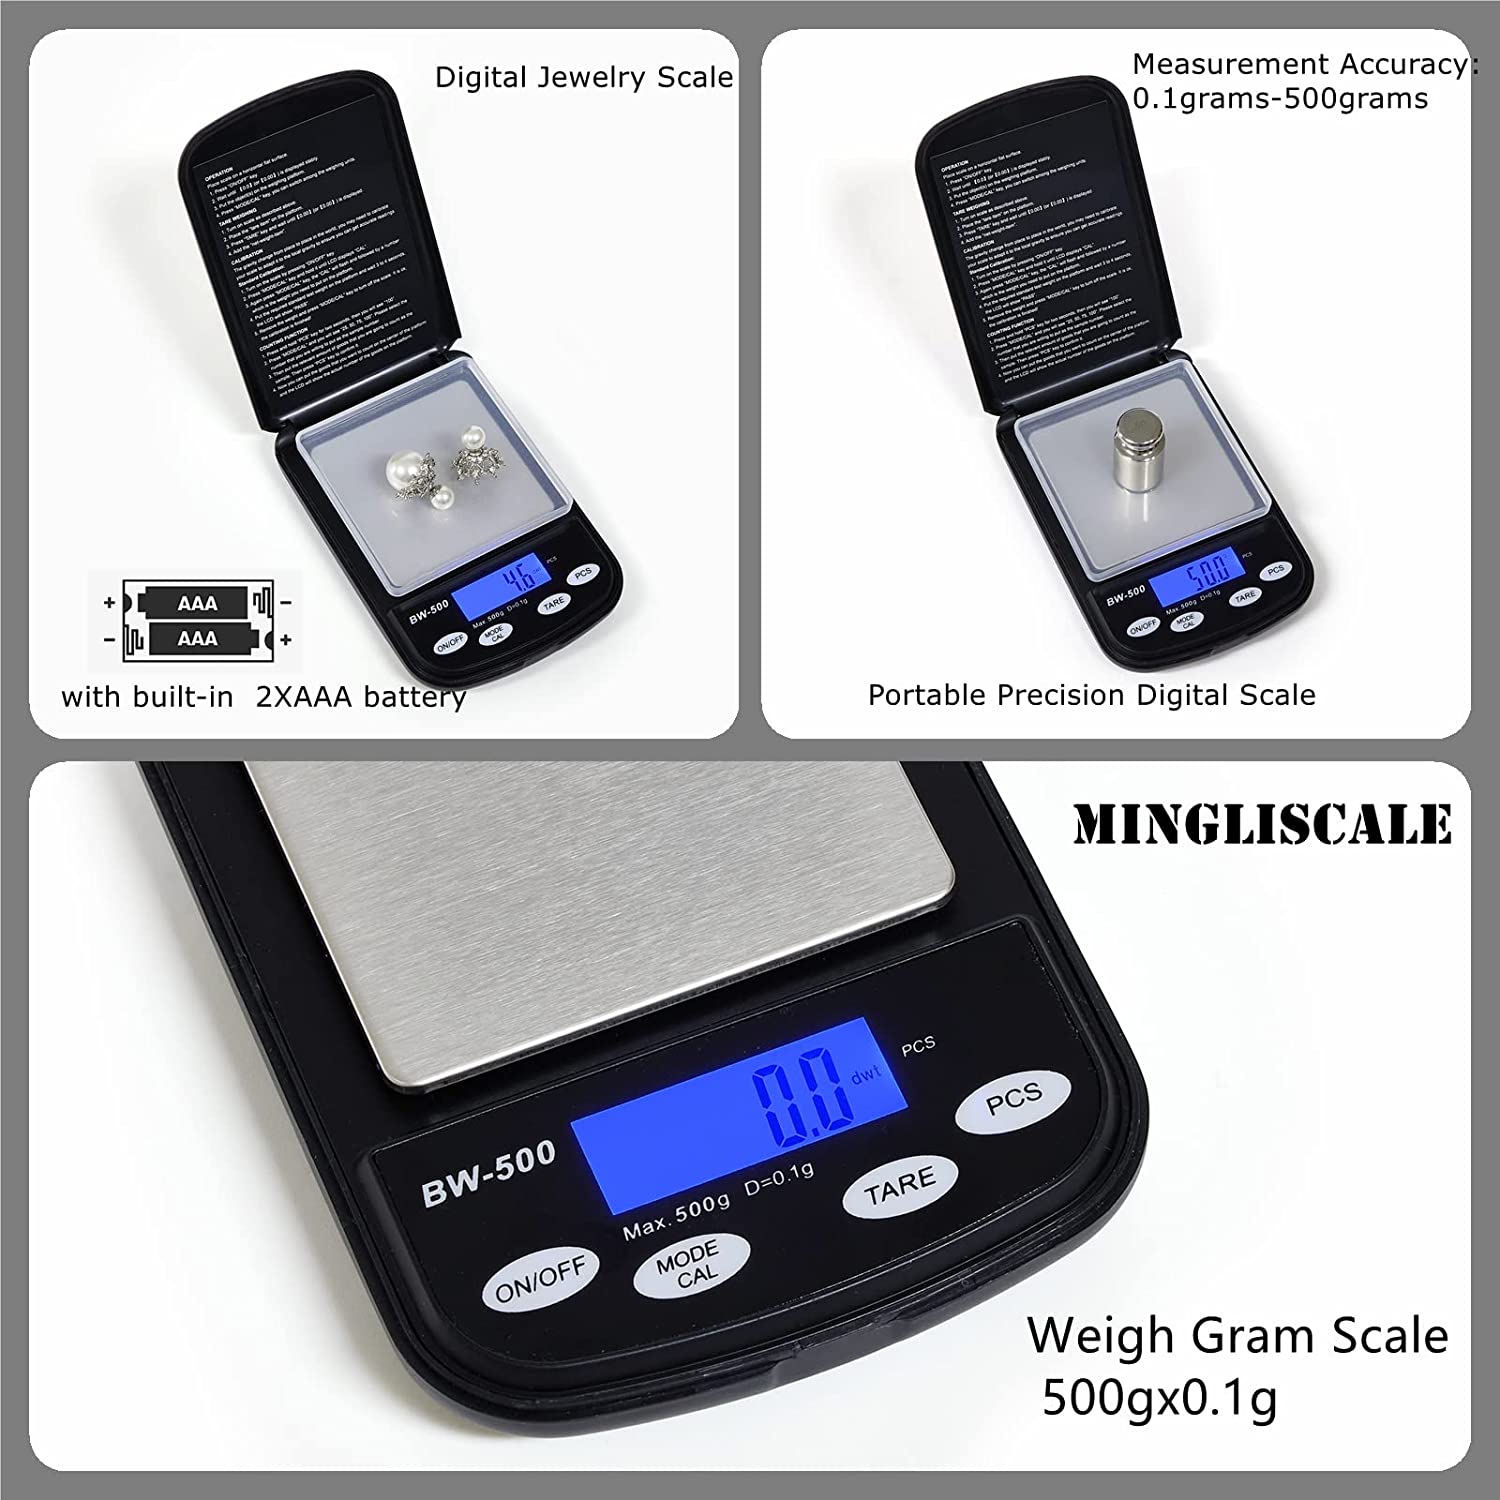 MINGLISCALE Weight Gram Scale Digital Pocket Scale, Jewelry Scale, Food  Scale, 500g x 0.1g, Digital Kitchen Gram Scale, Coffee scale0.1g, Easy to  Carry – C.B.Electronics